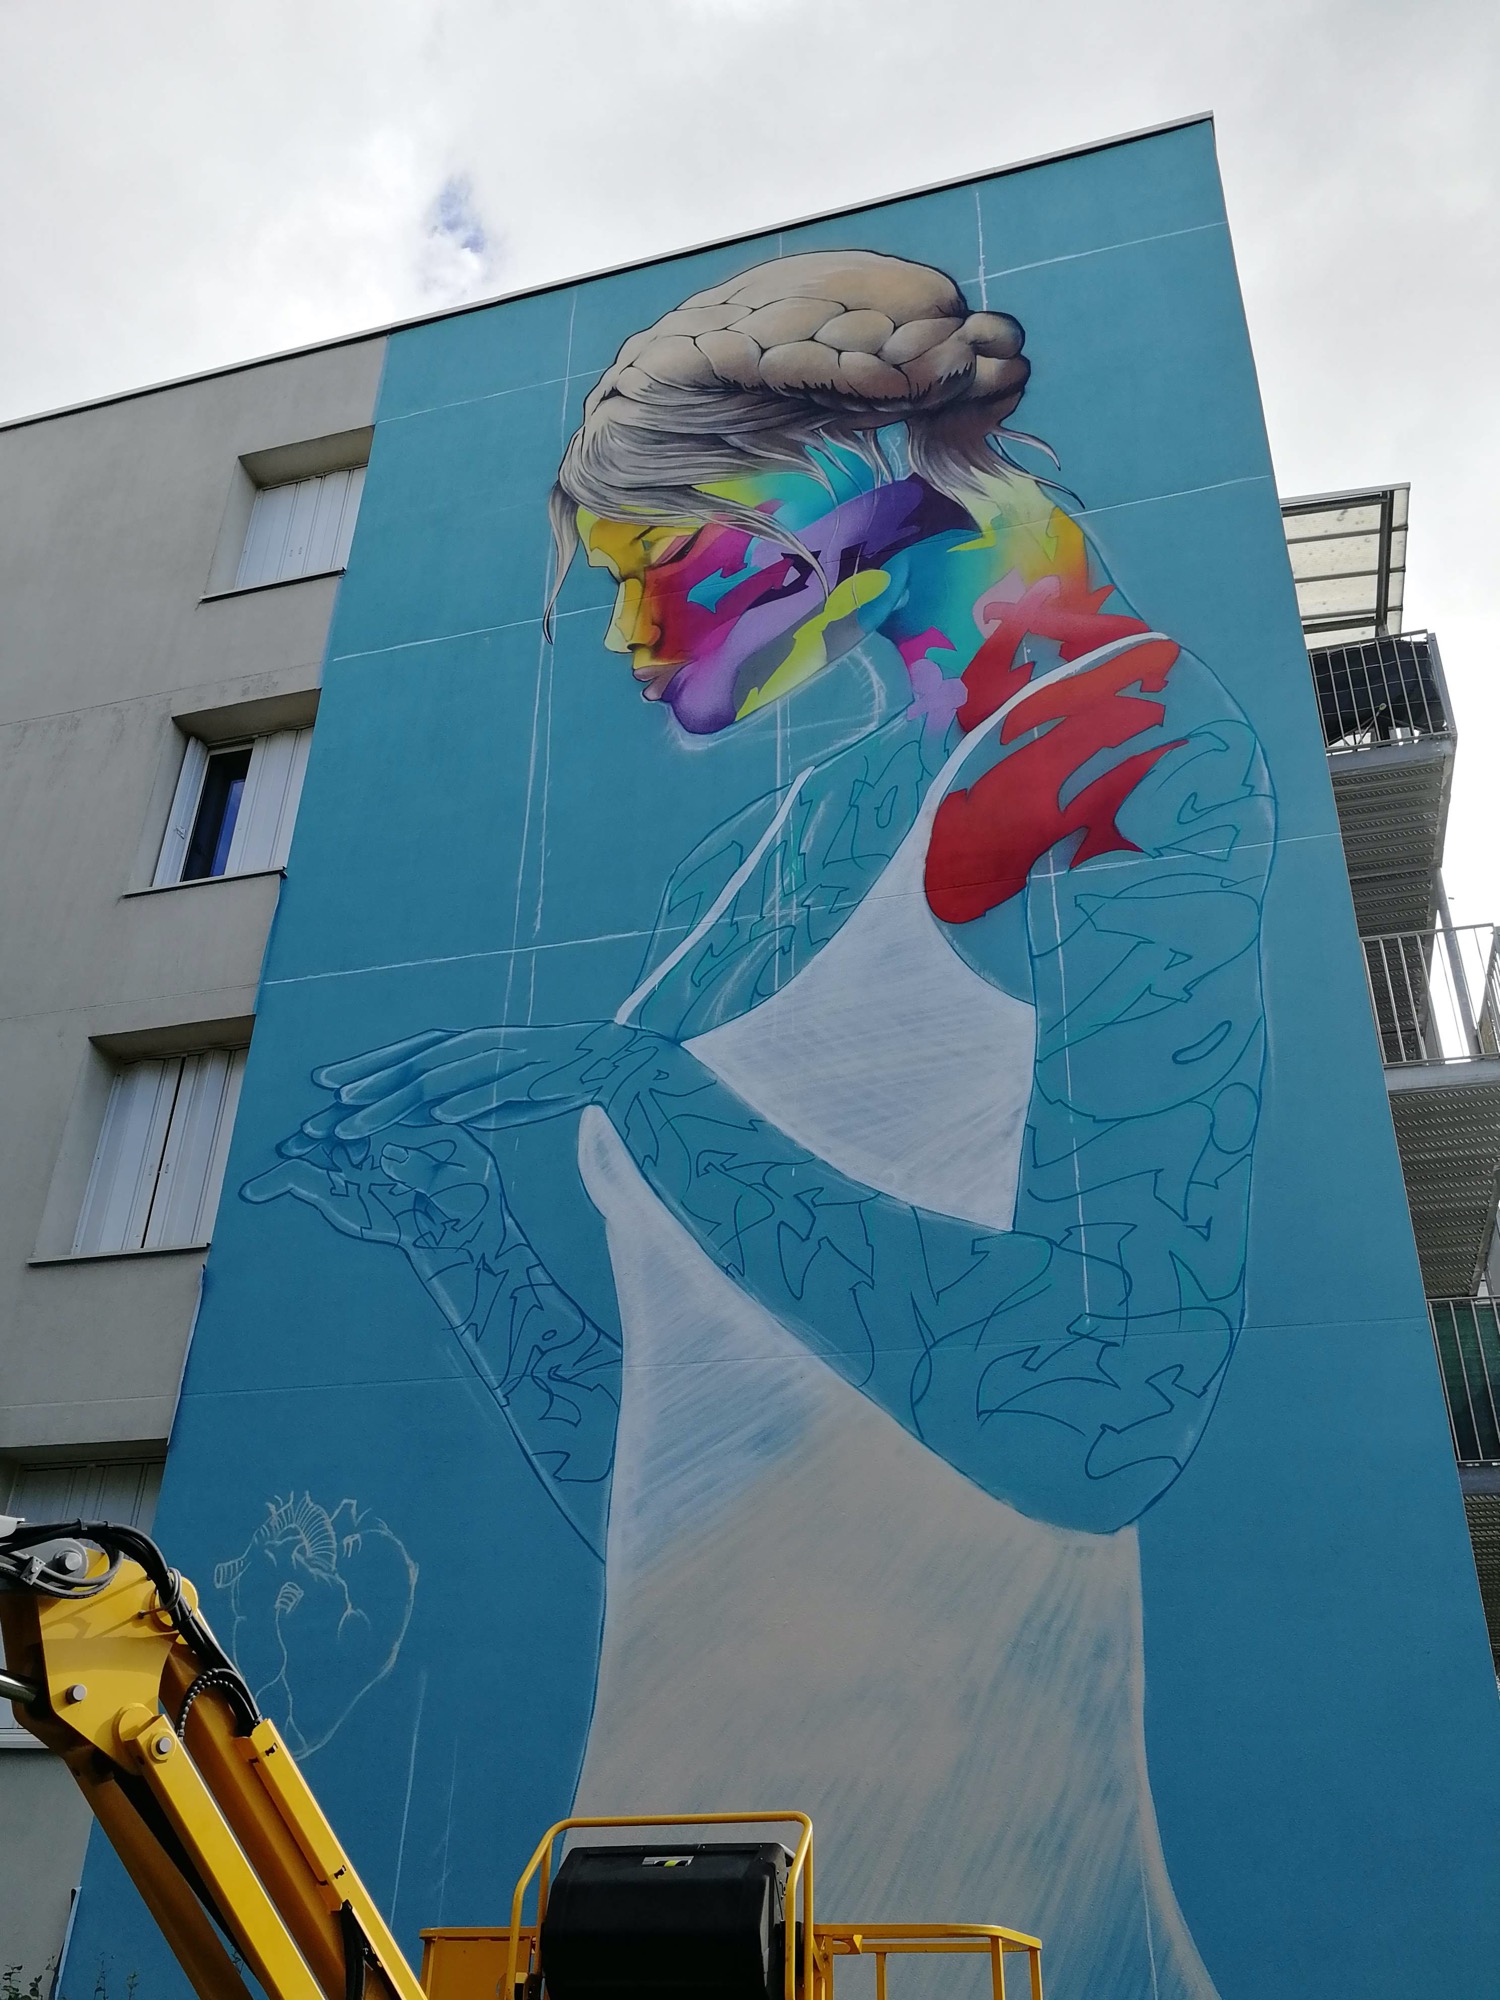 Graffiti 4494  by the artist Snake captured by Rabot in Saint-Brieuc France